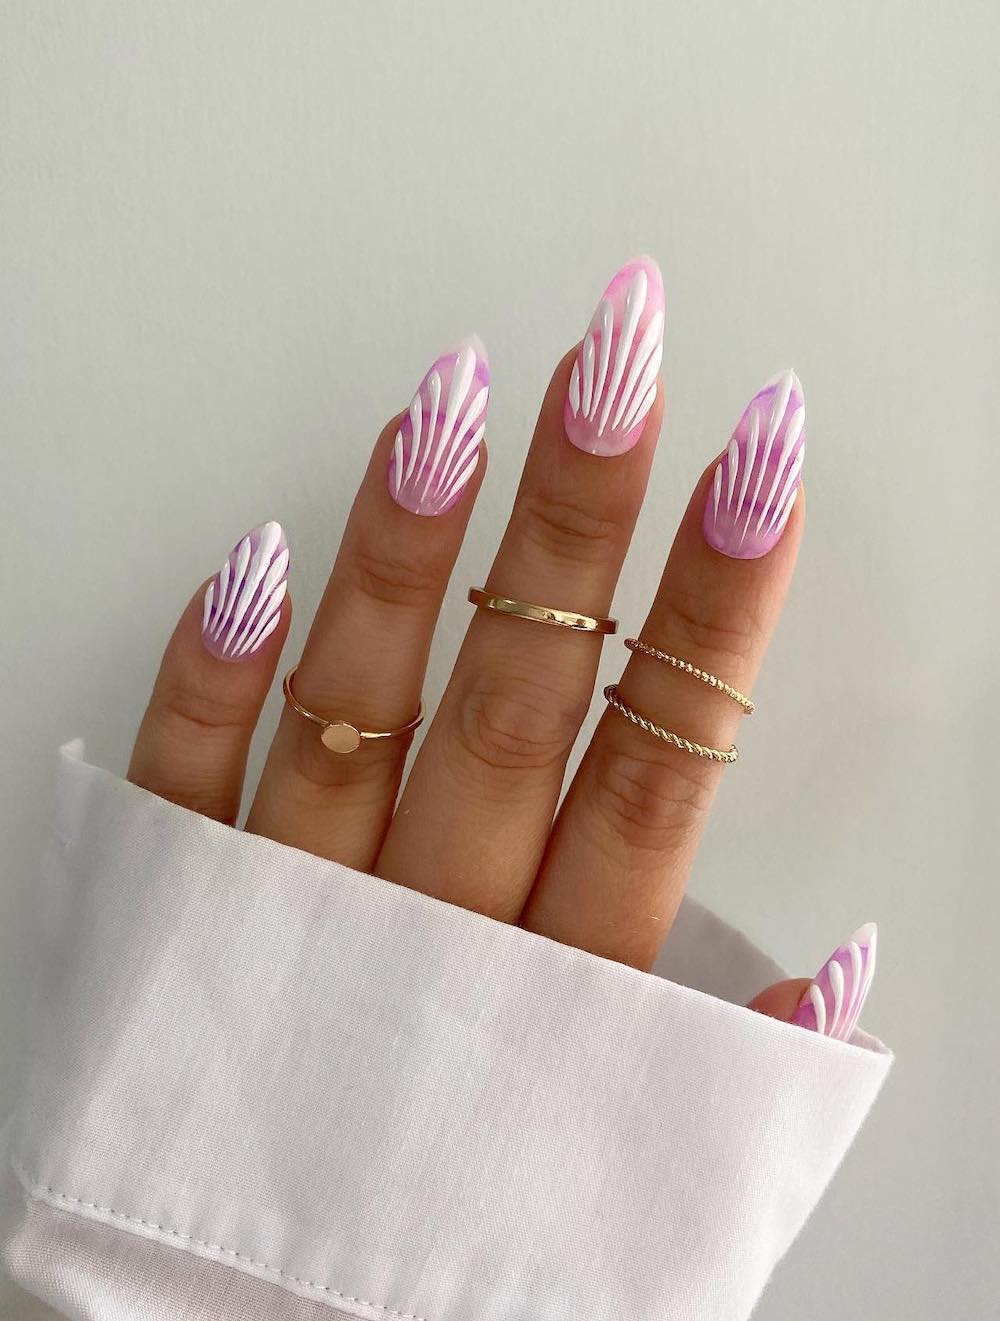 A hand with long almond nails painted to look like seashells with light and dark pink polish and white accent lines